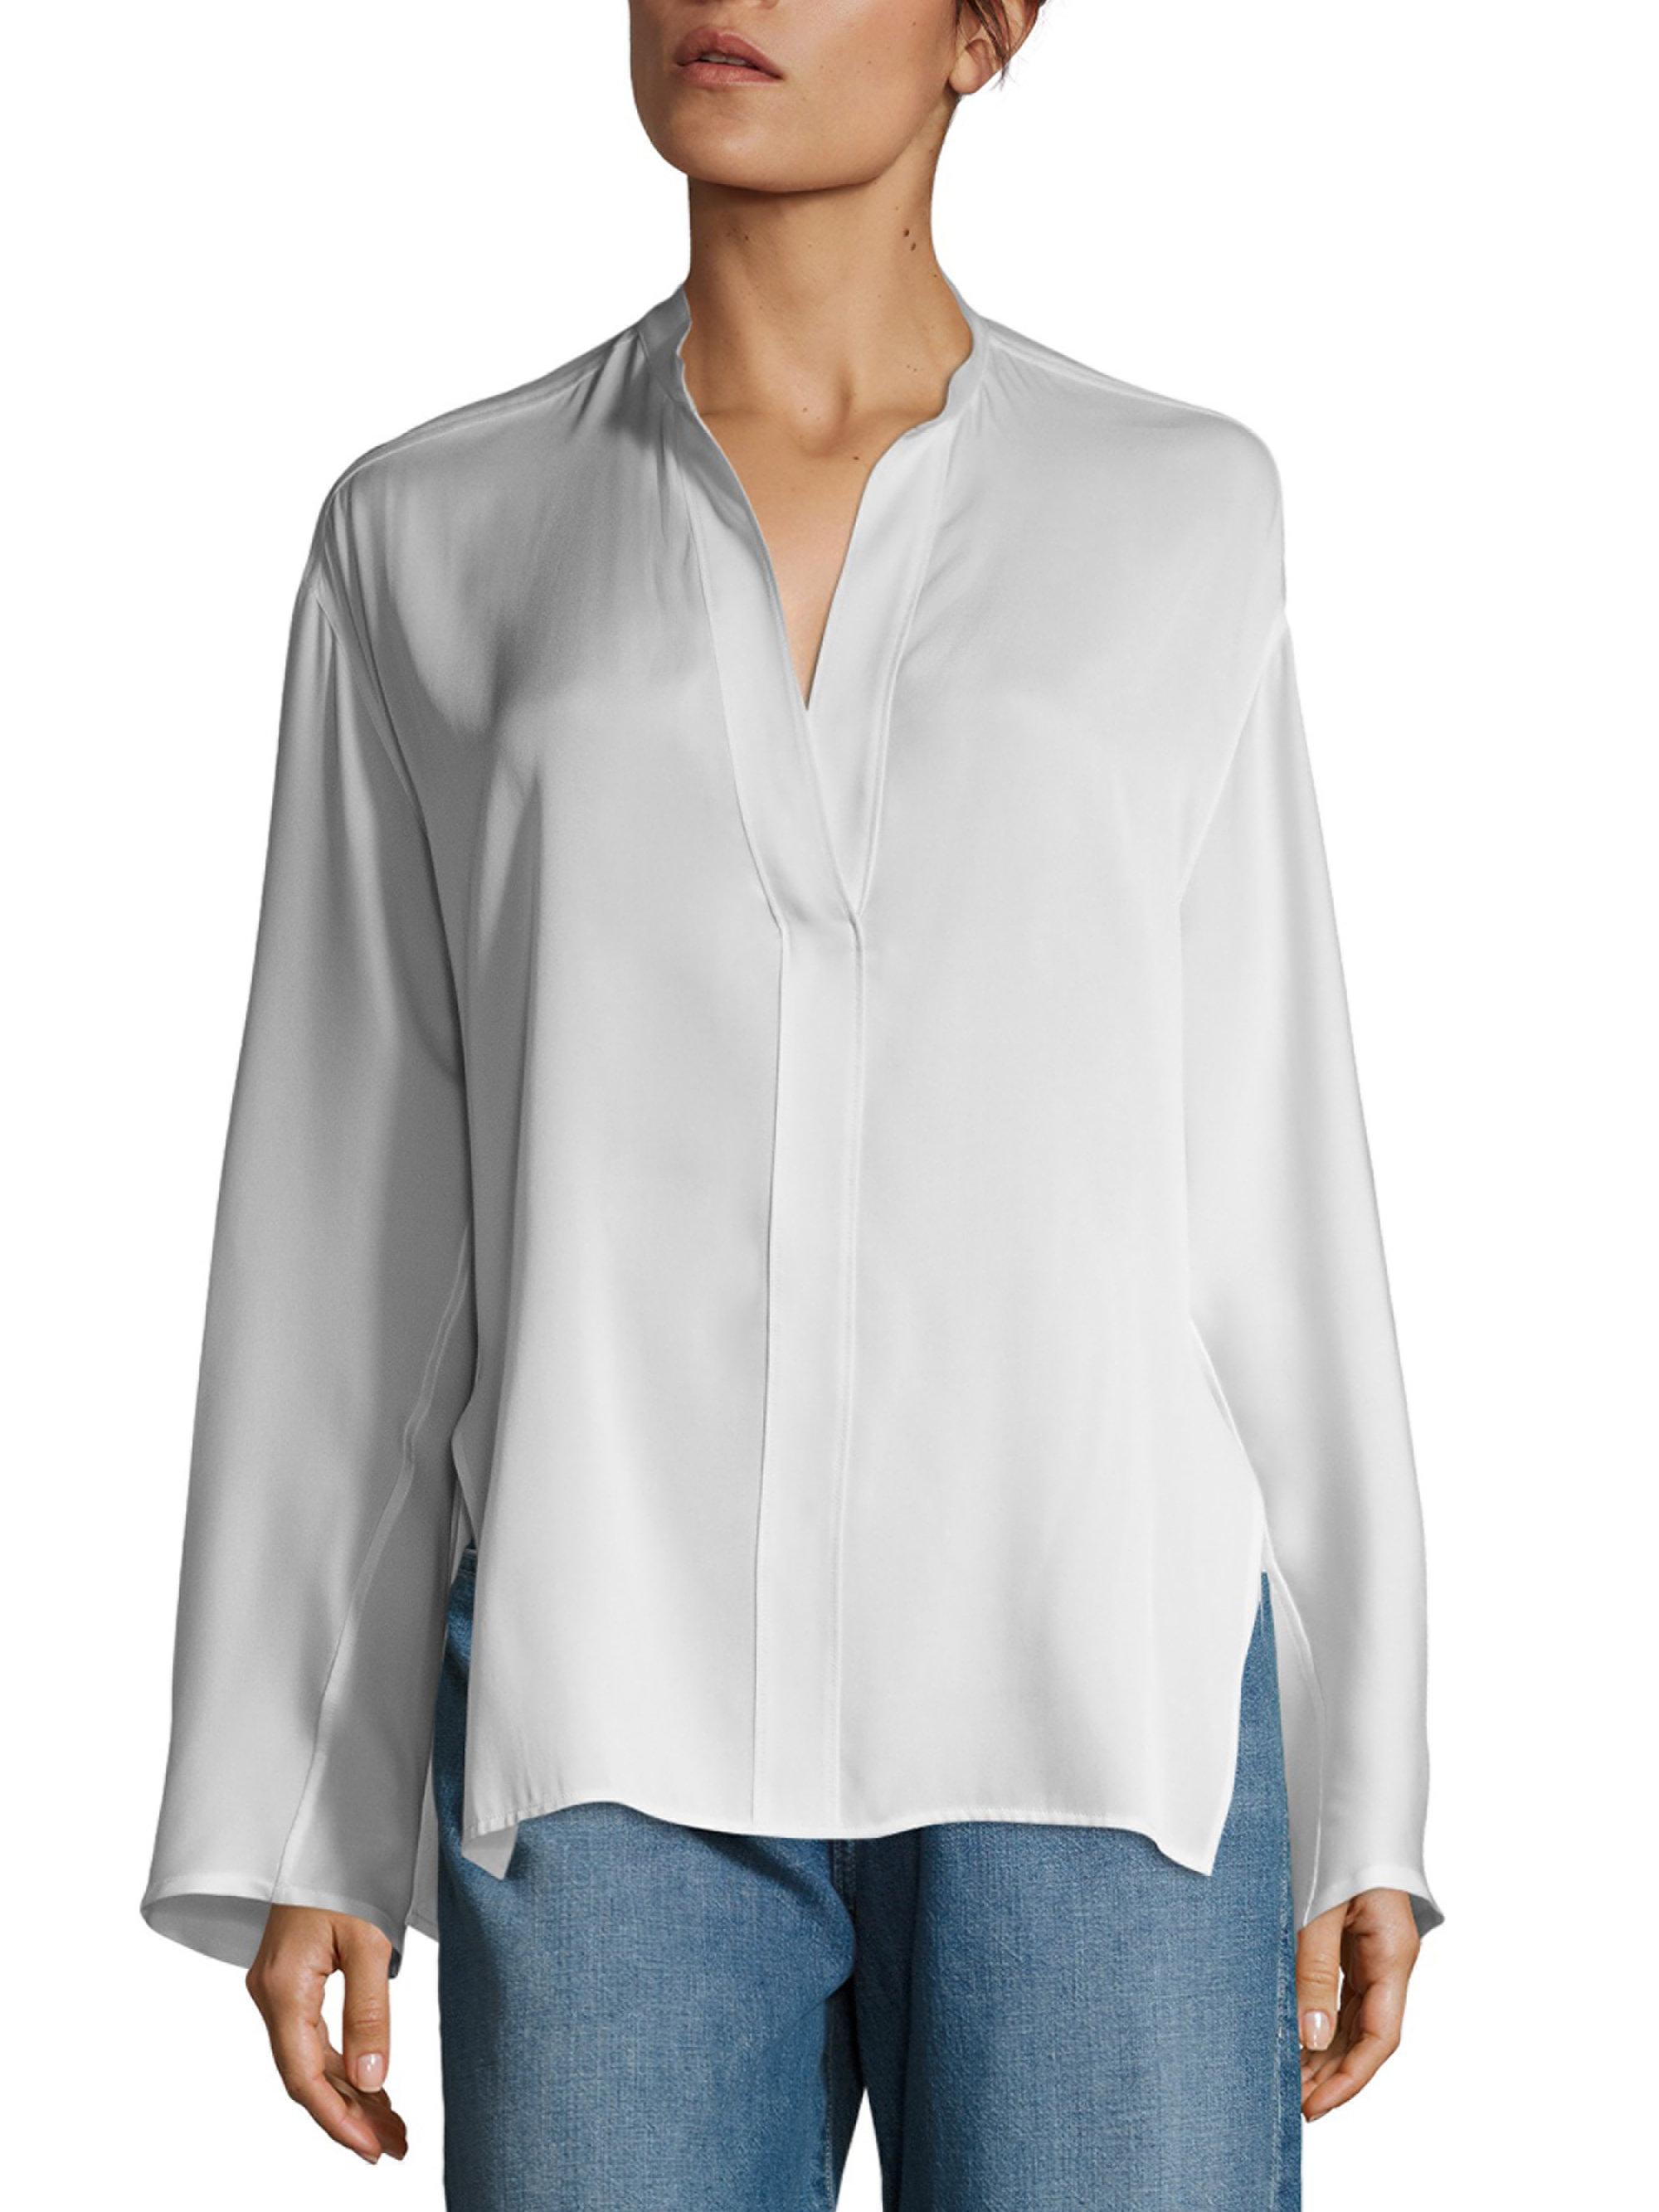 Lyst - Vince Stand Collar Silk Blouse in White